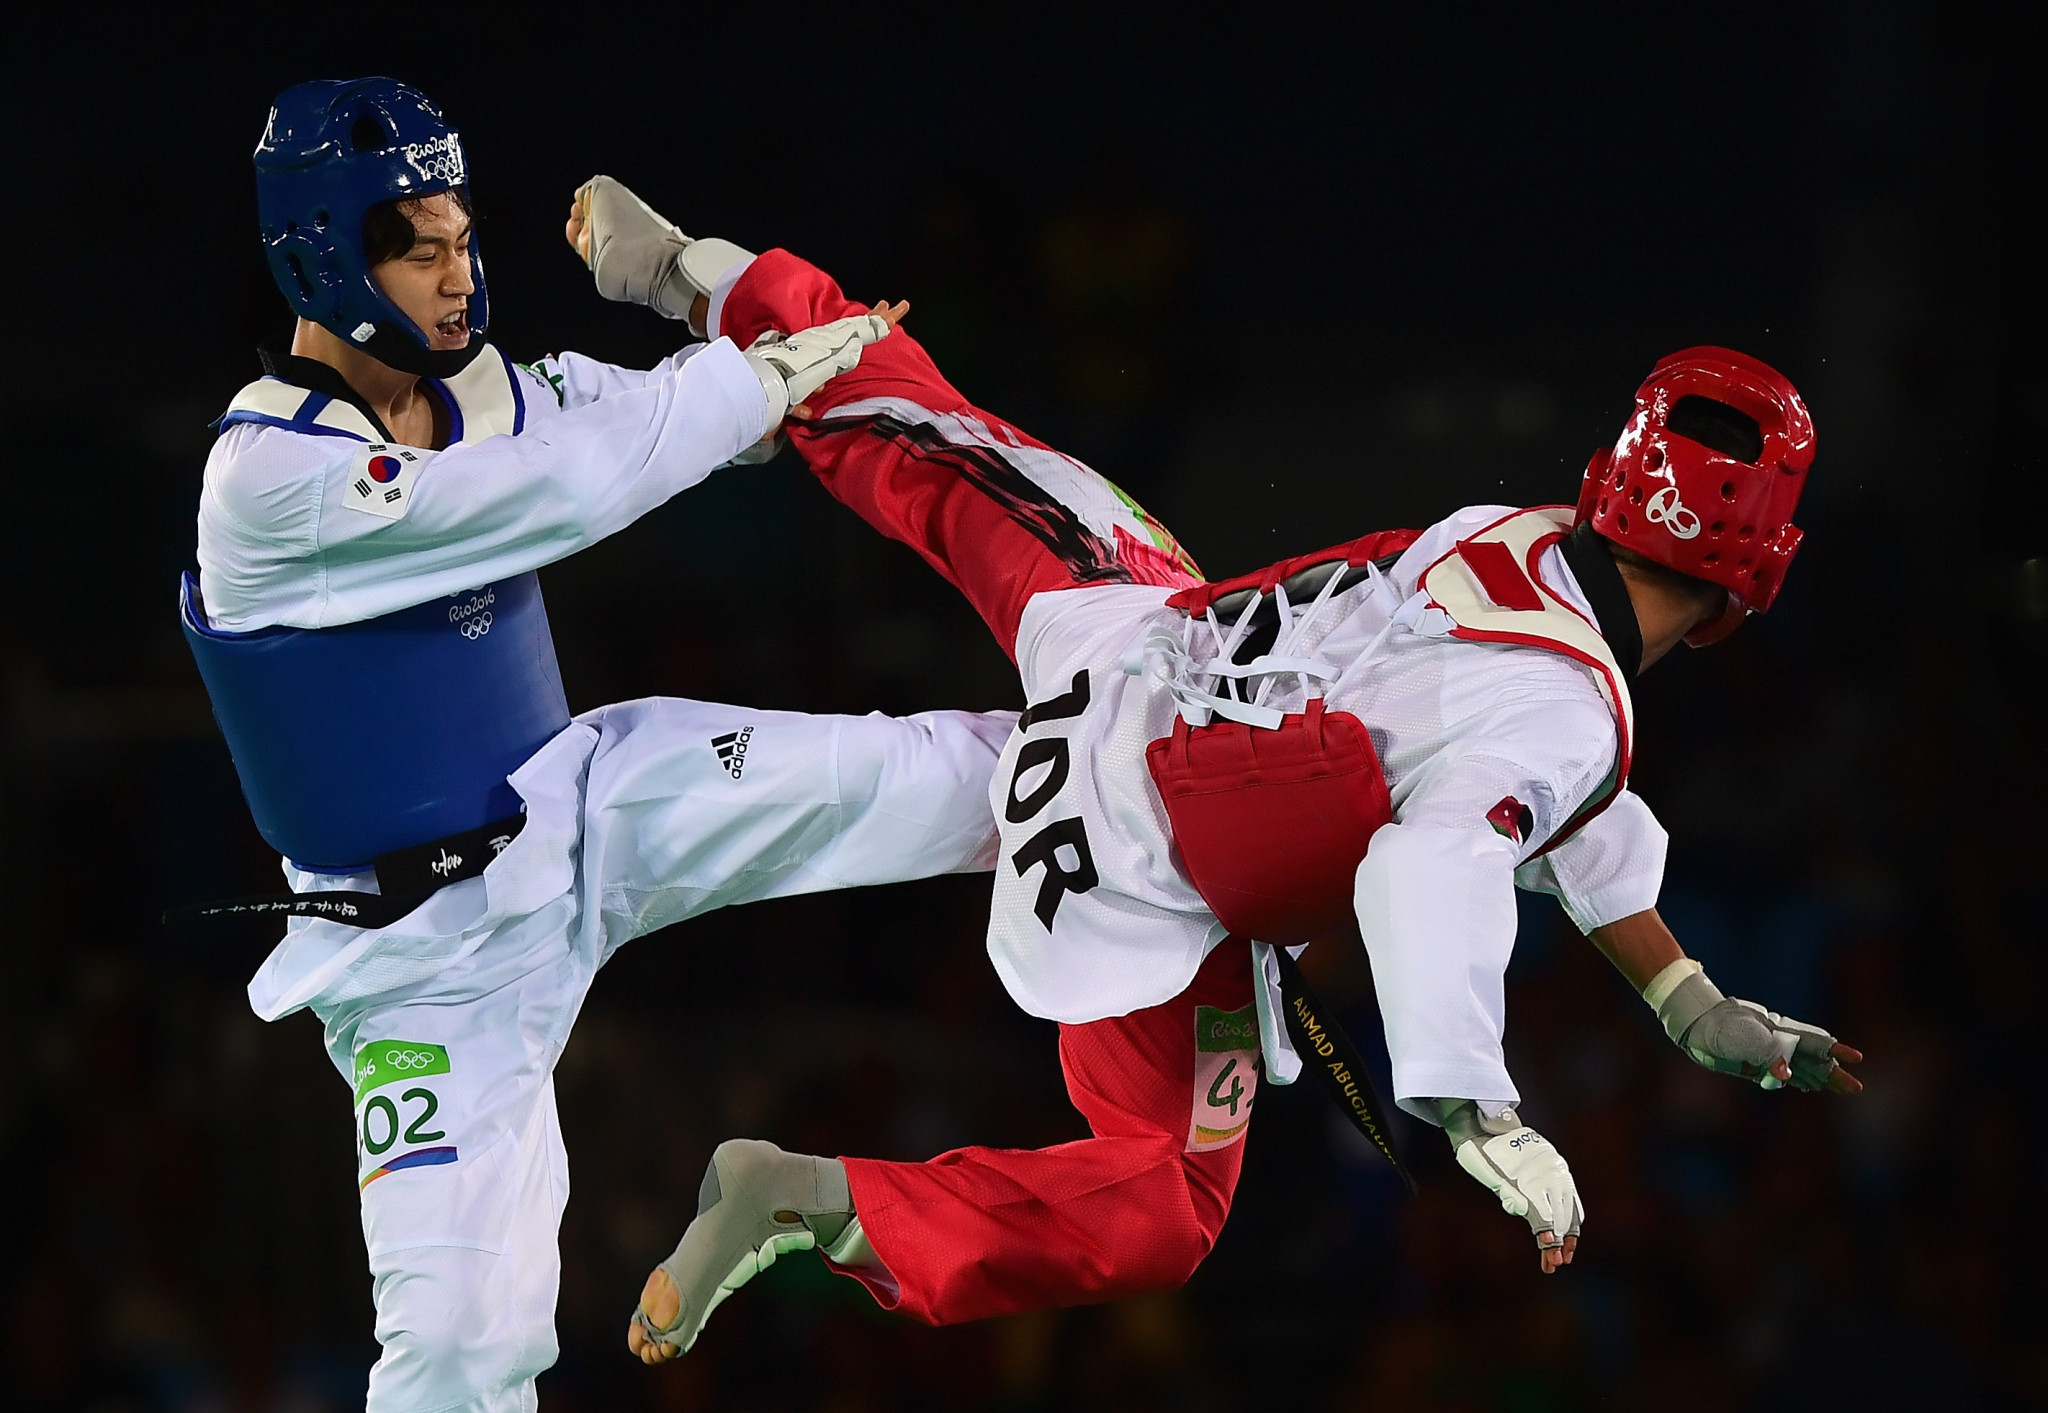 Jordan has witnessed a taekwondo boom since Ahmed Abughaush's Olympic gold medal ©Getty Images